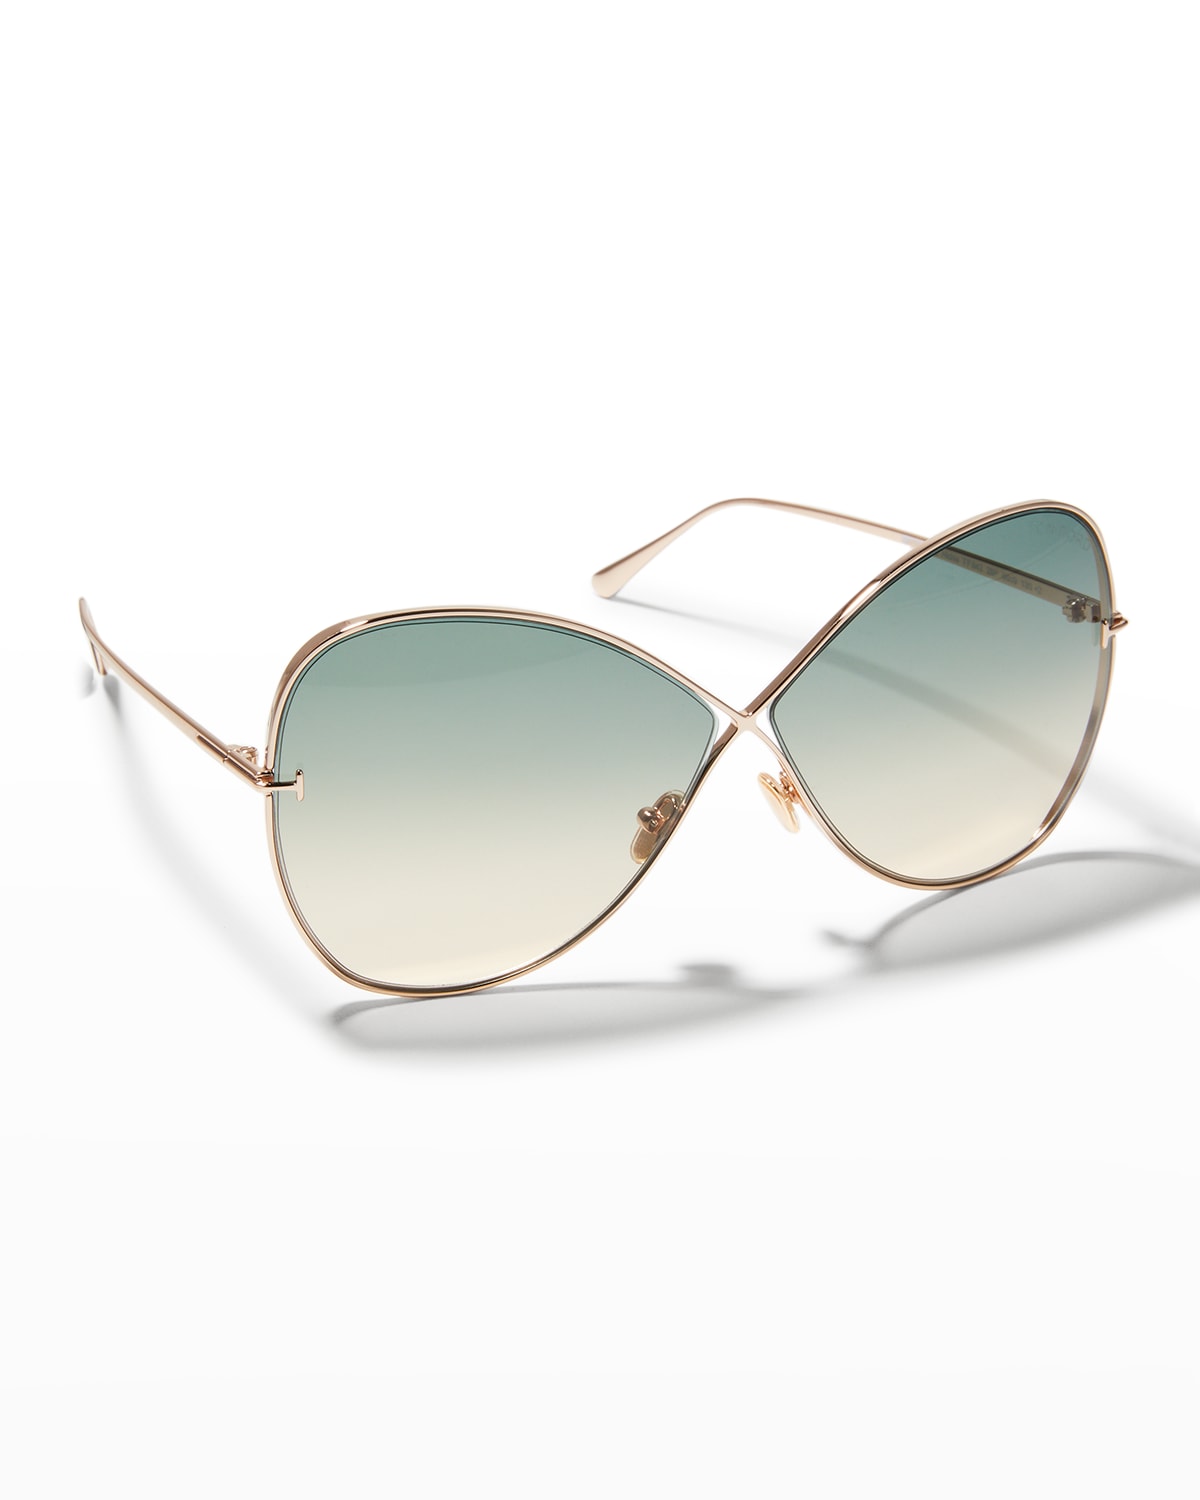 TOM FORD NICKIE METAL BUTTERFLY SUNGLASSES